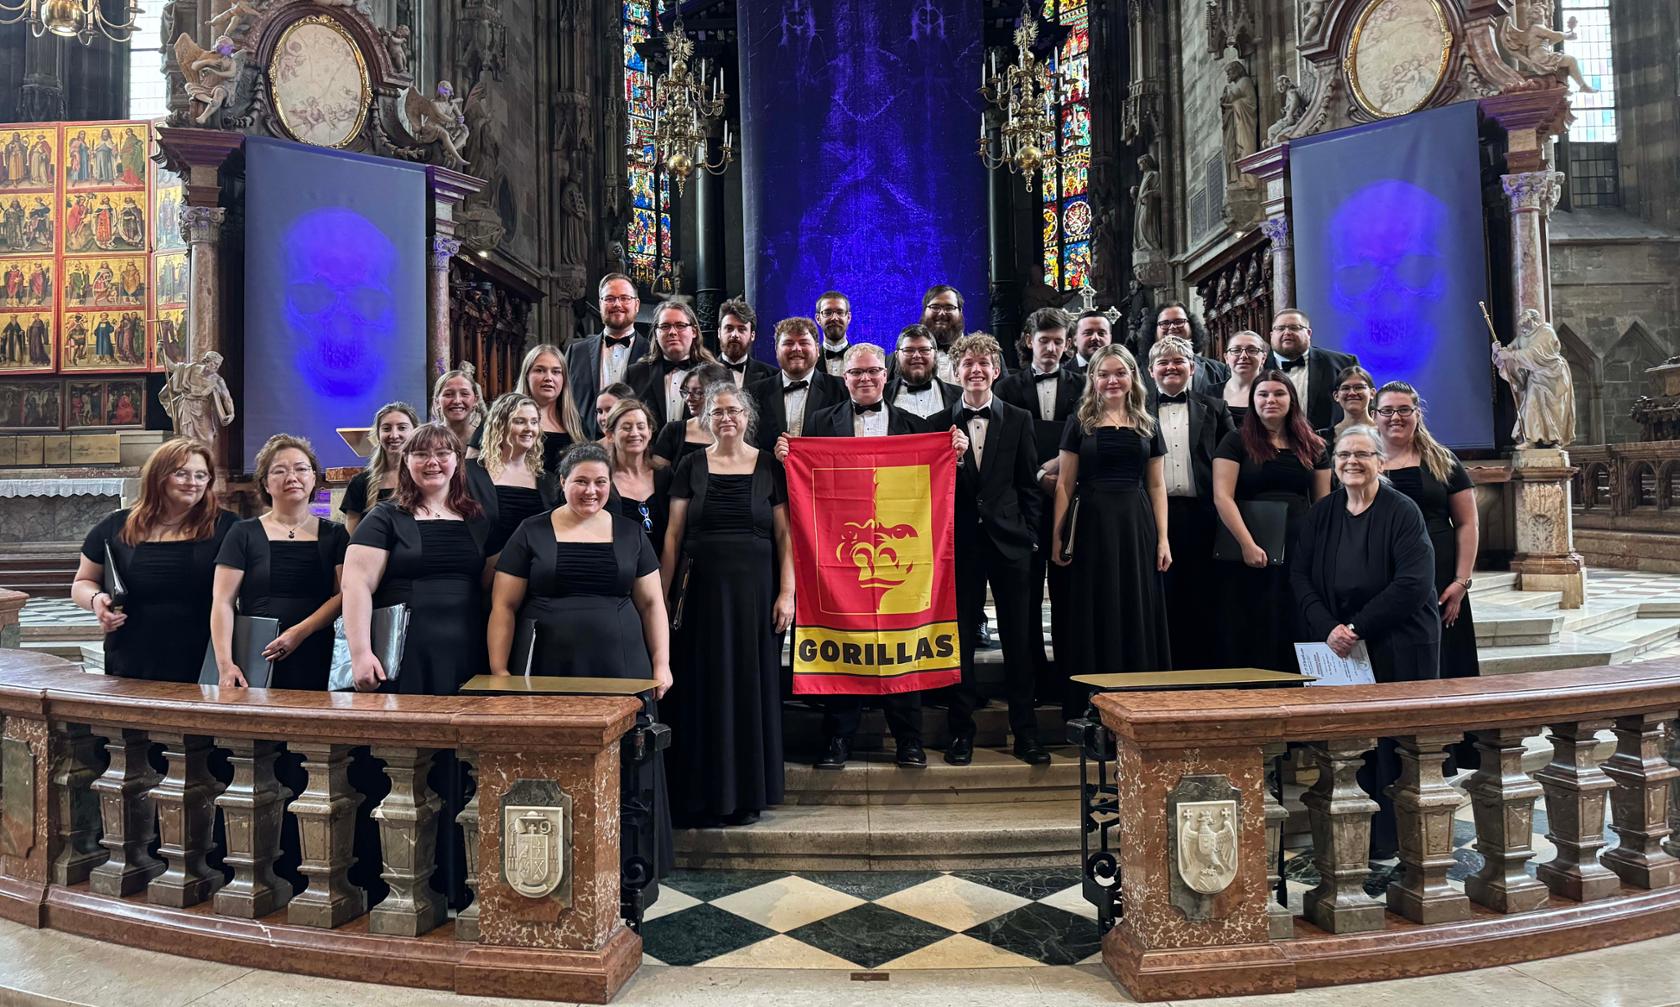 Students with Pitt State banner in cathedral